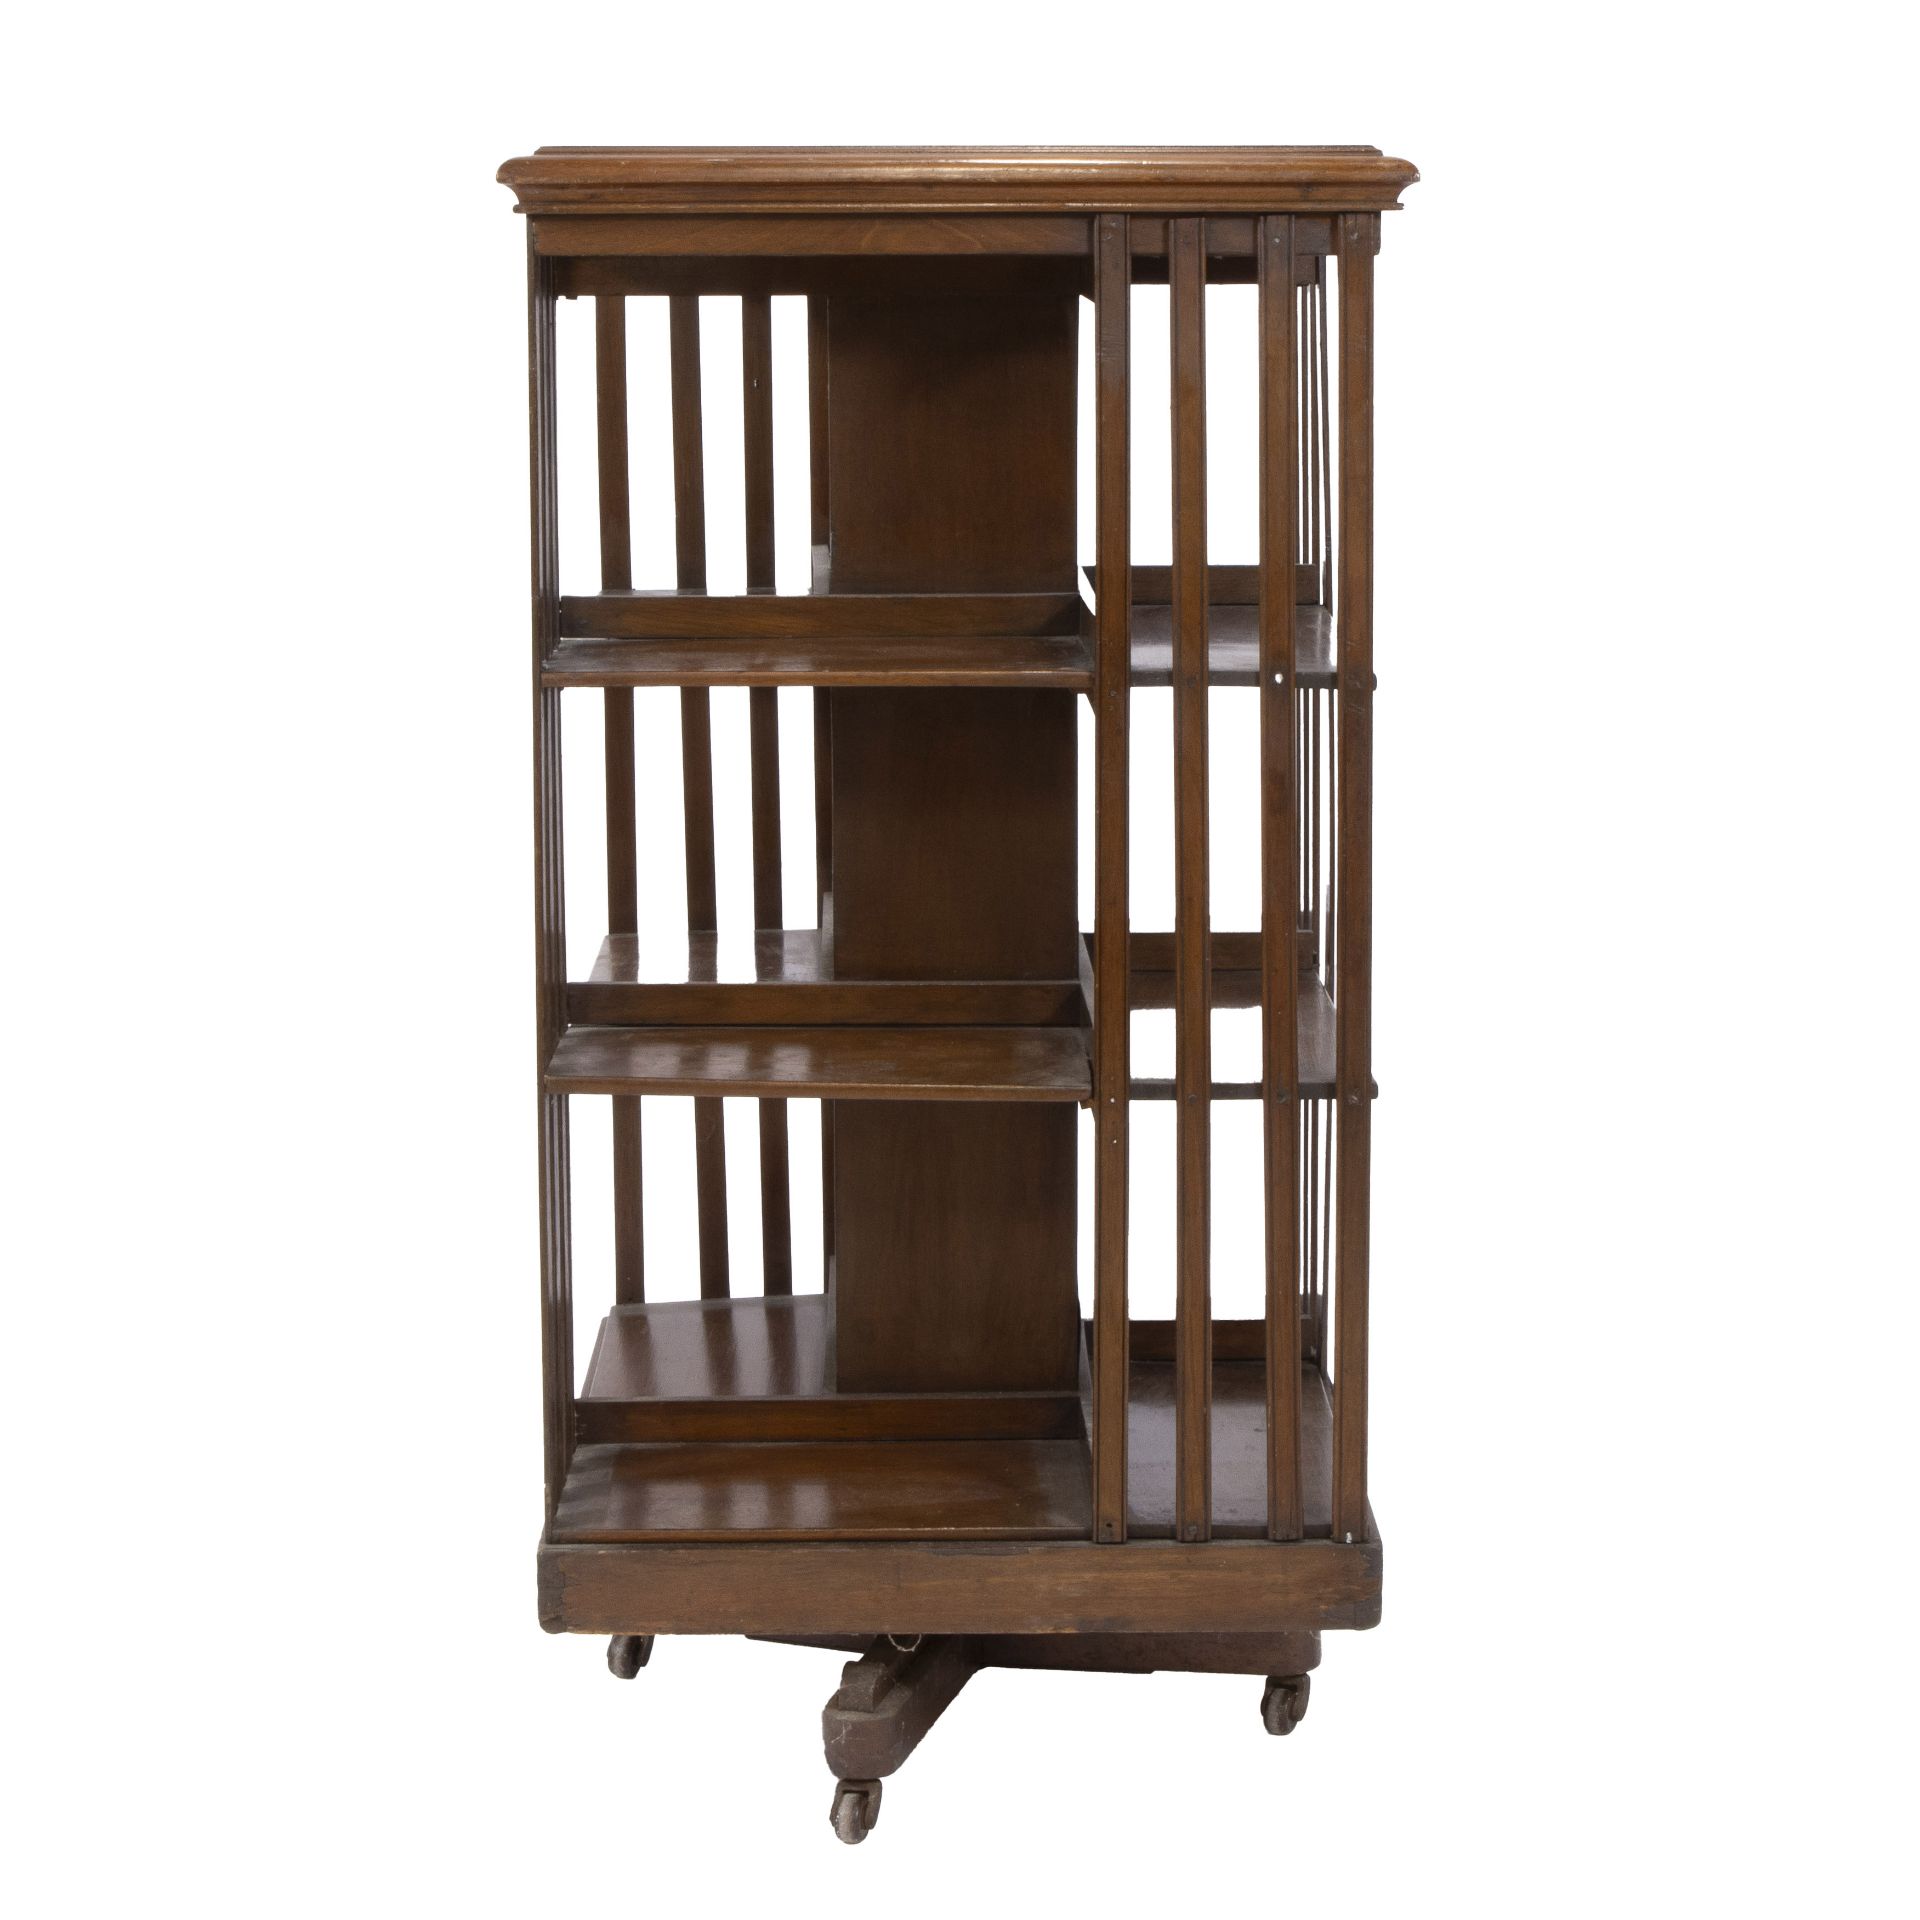 English oak bookmill with 3 levels and resting on castors, early 20th century - Bild 4 aus 6